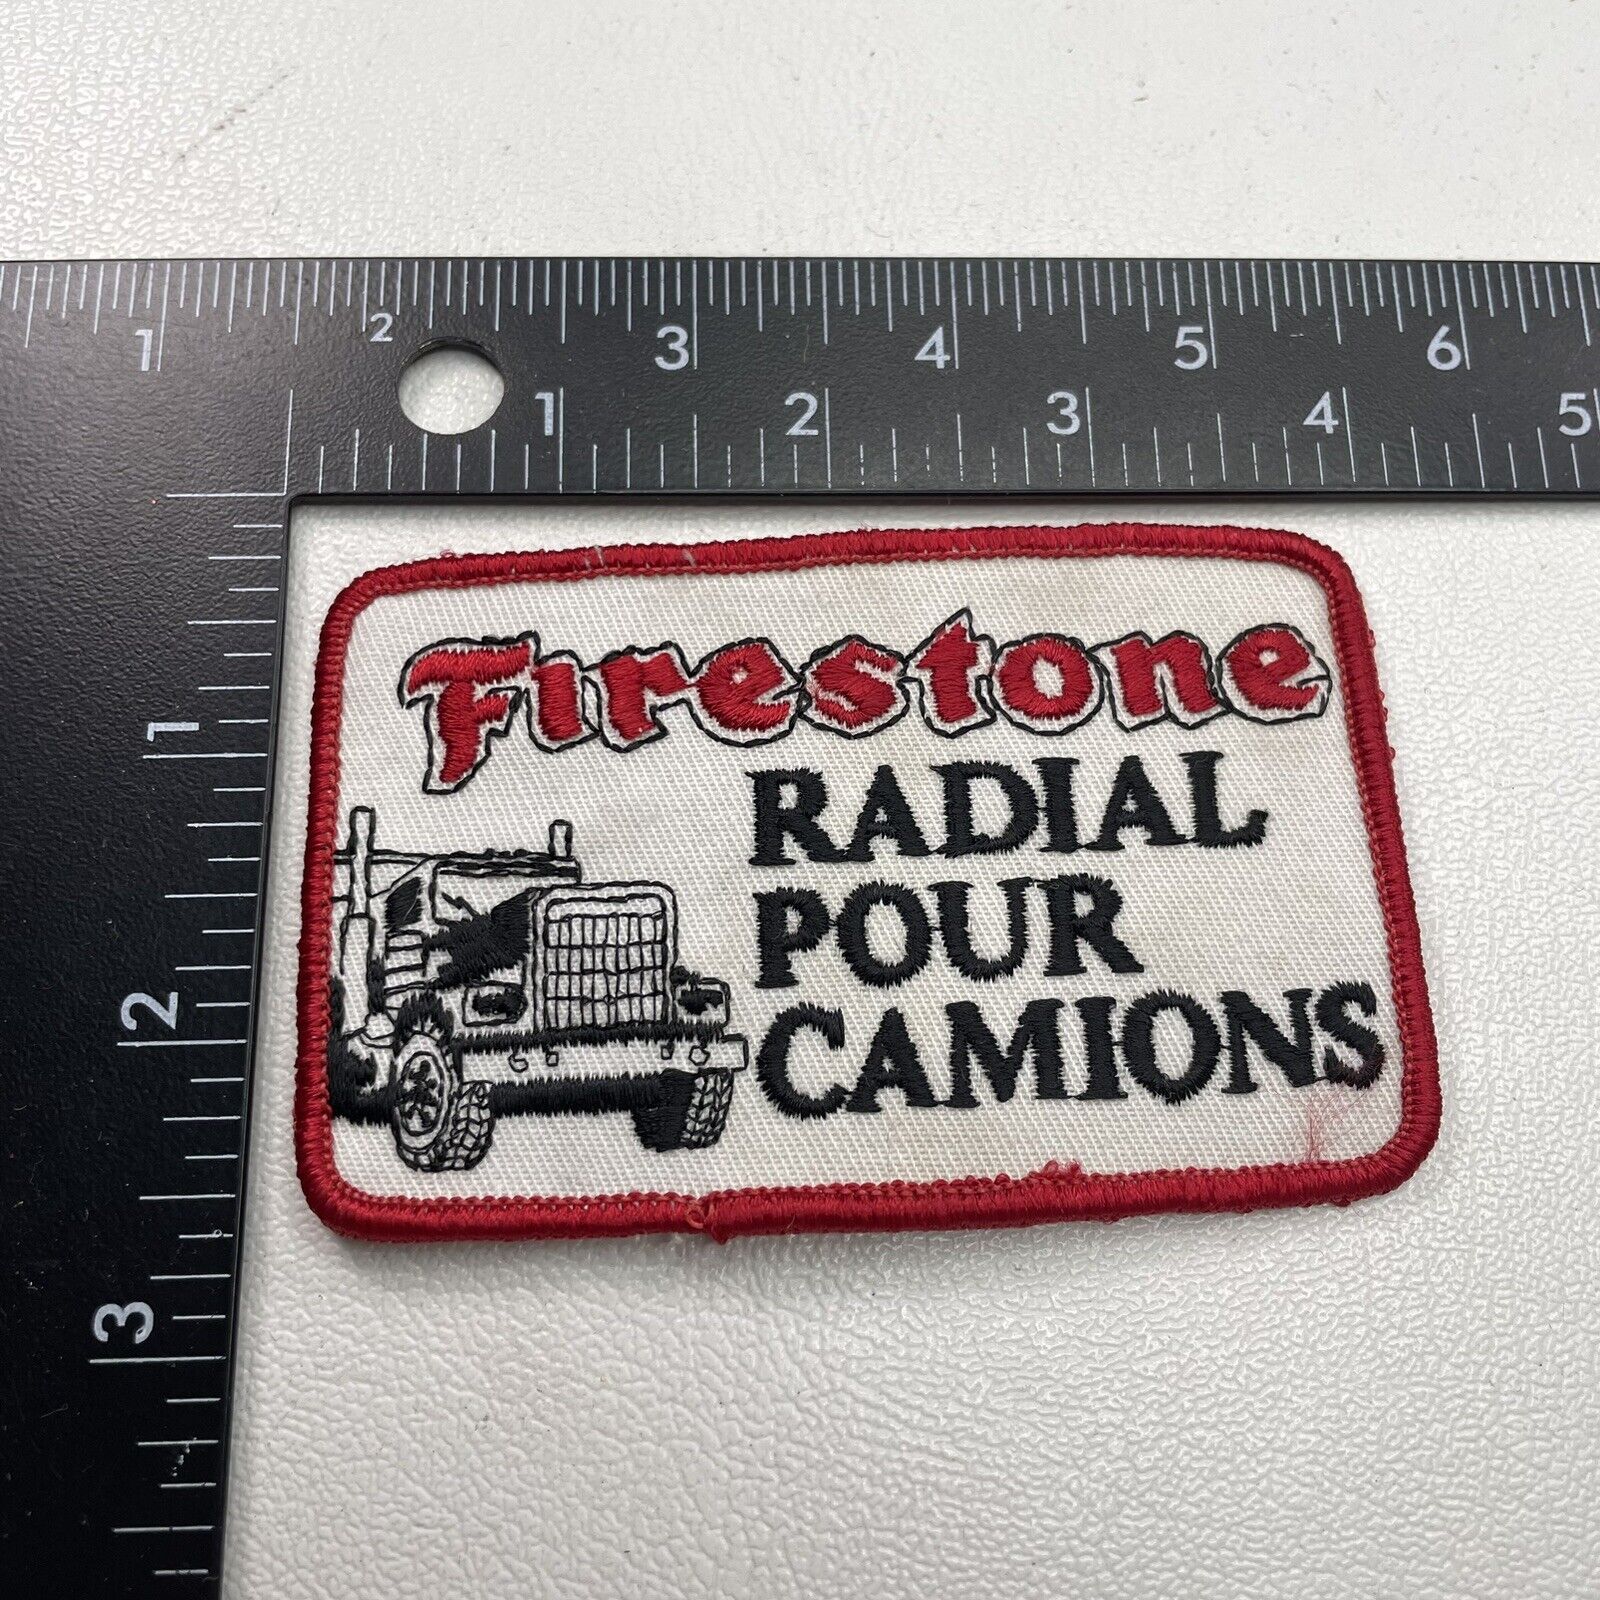 Vintage Semi-Truck FIRESTONE RADIAL POUR CAMIONS Truck Tire Trucker Patch 24TI